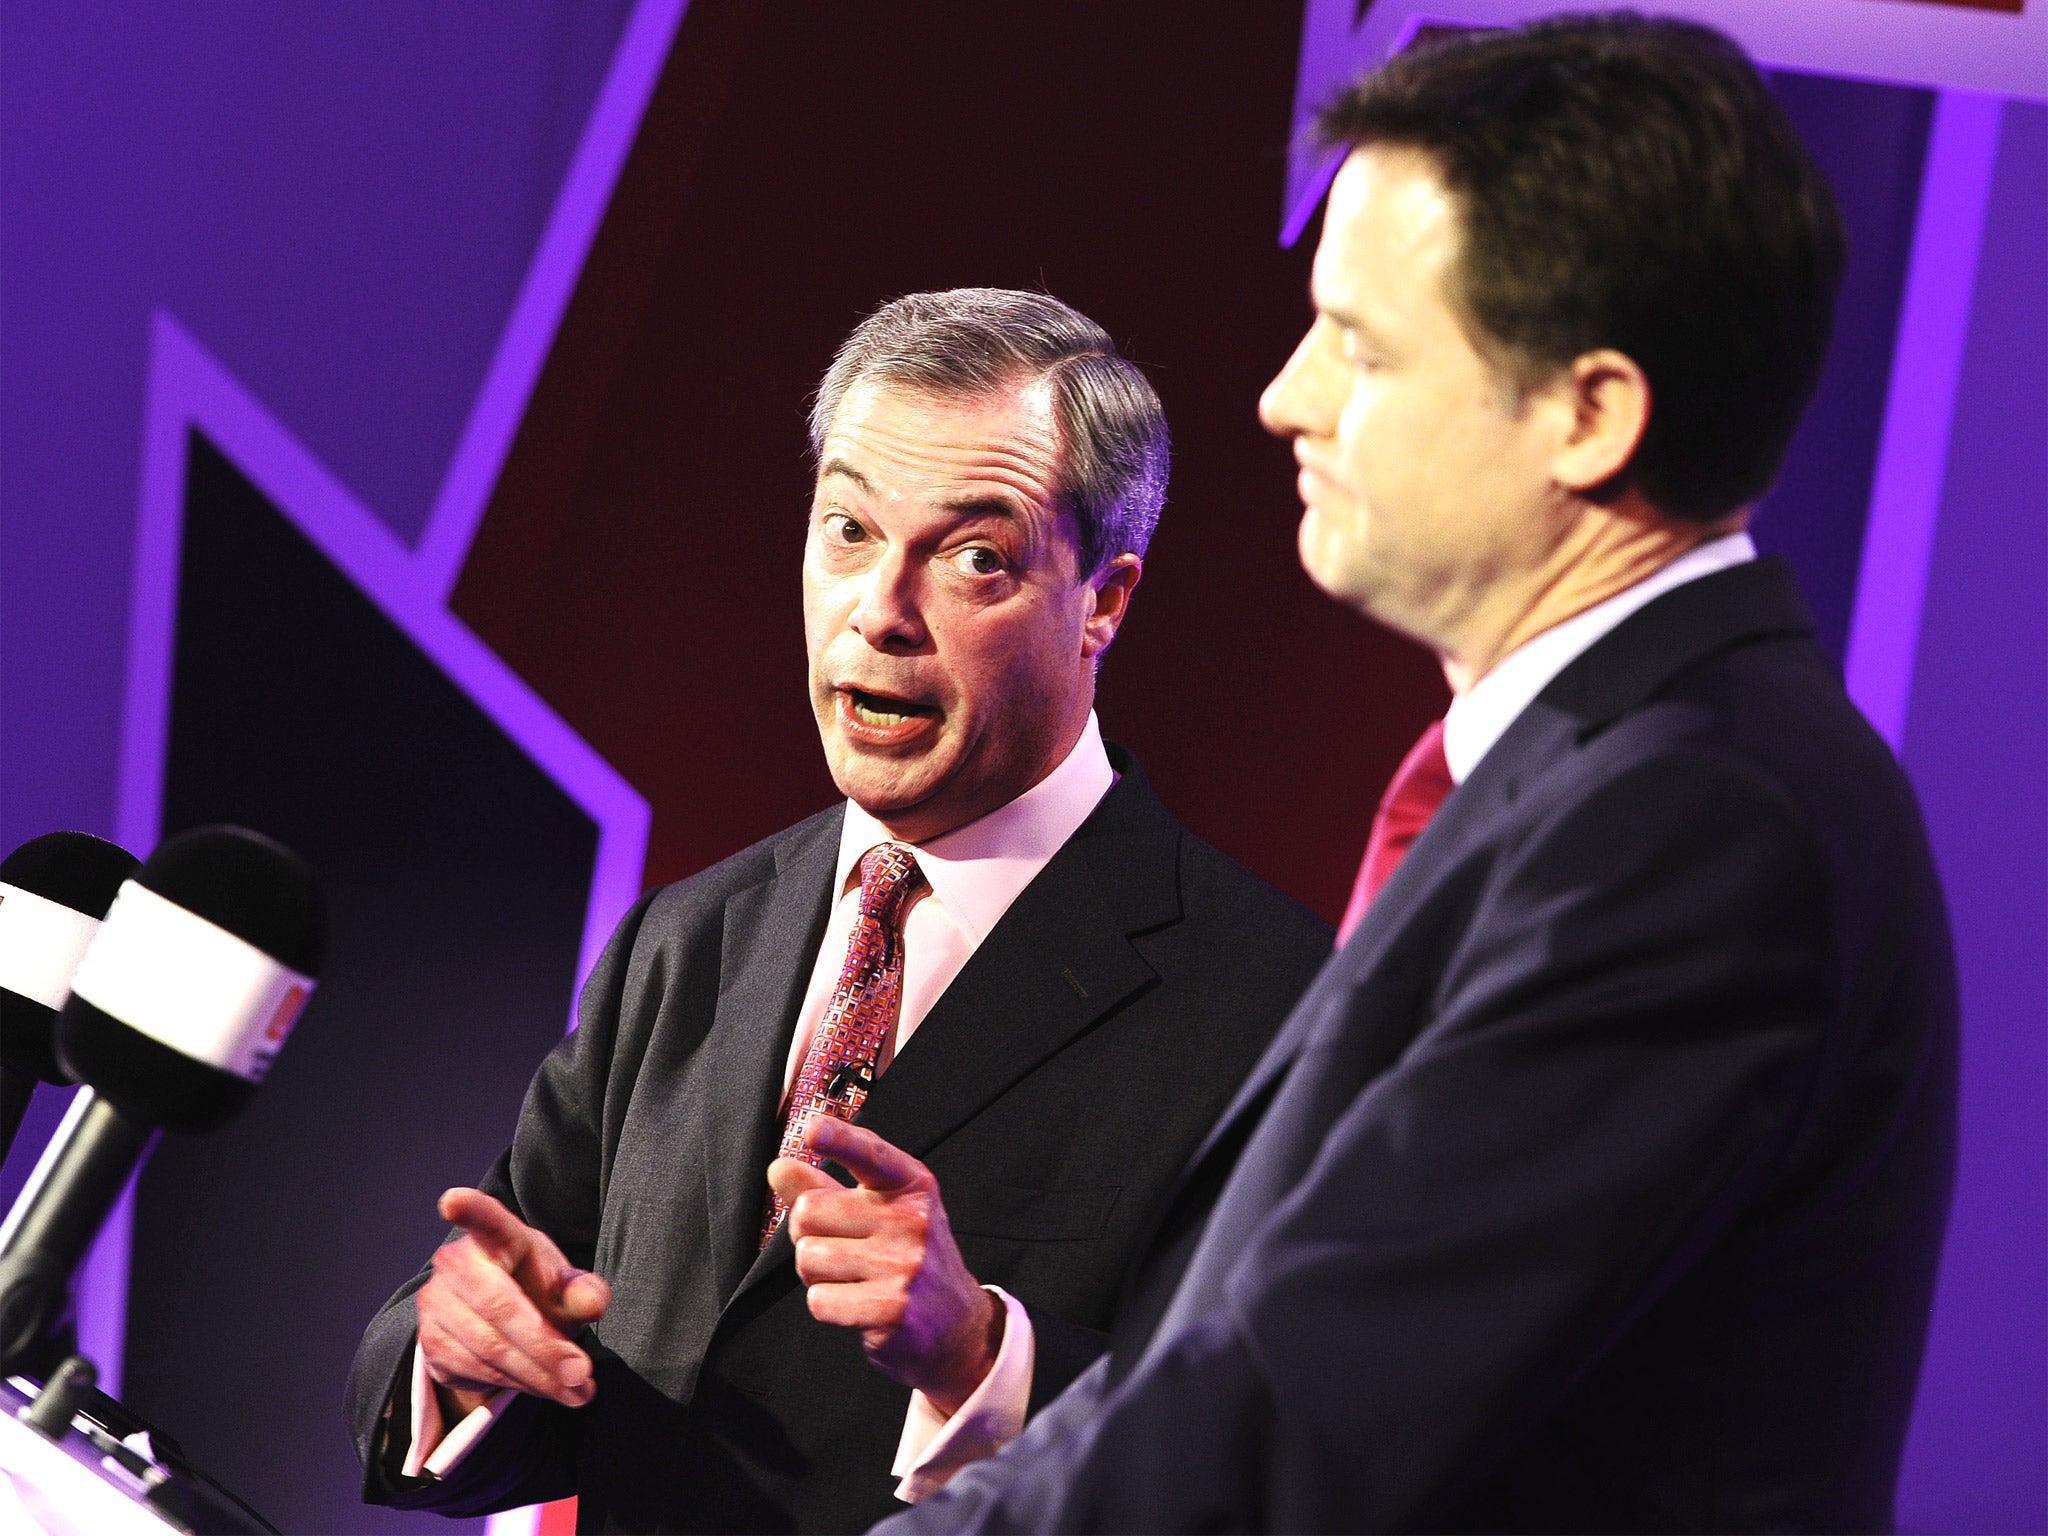 Farage and Clegg will go head-to-head again on Wednesday